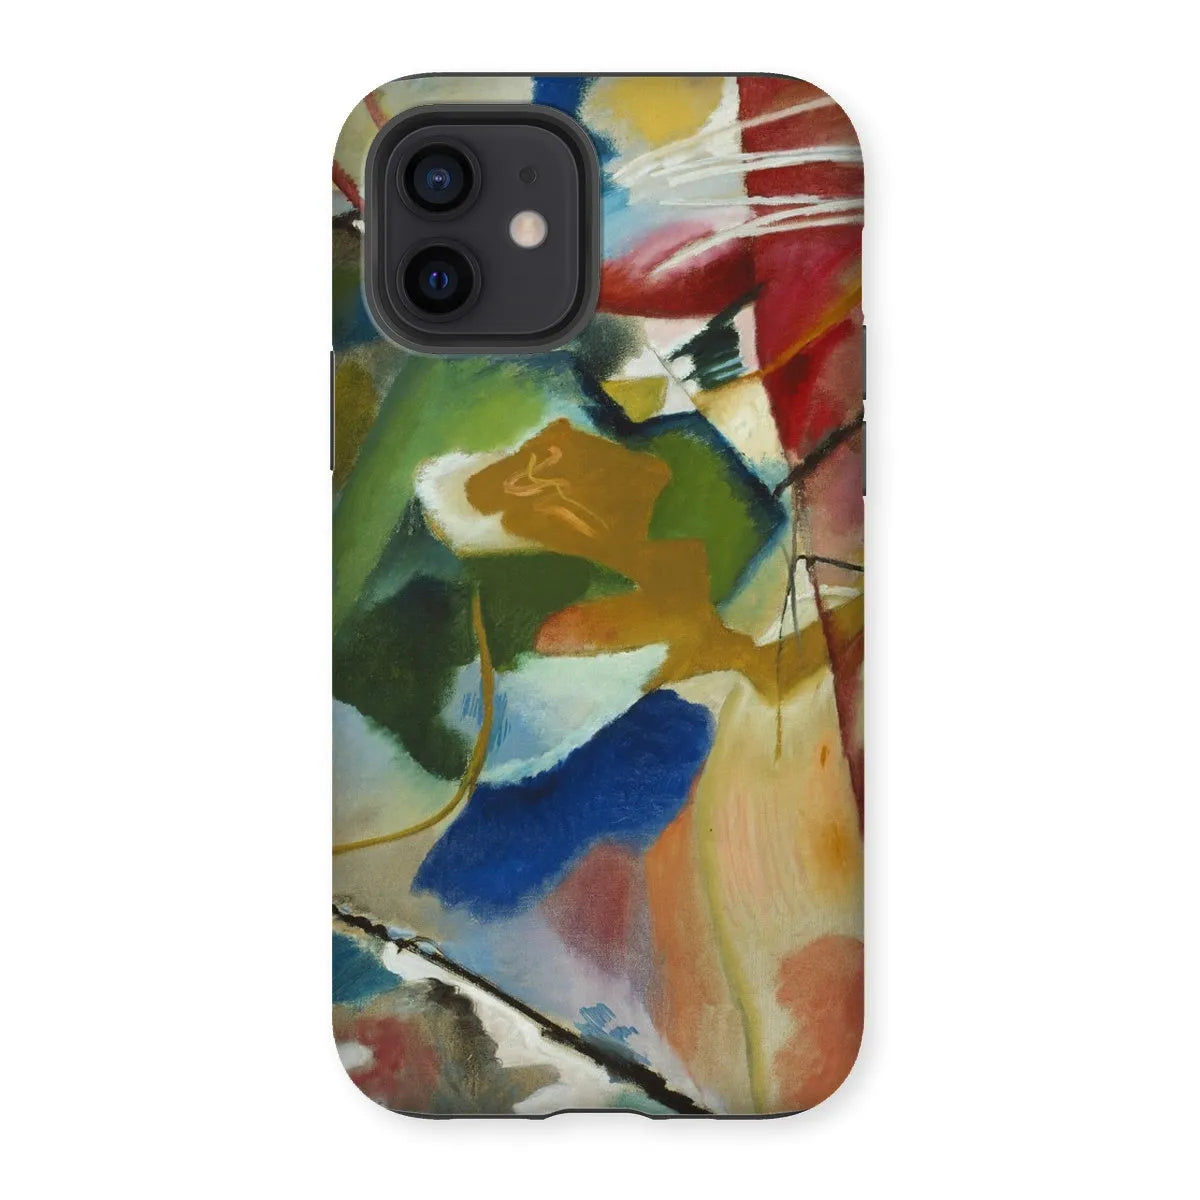 Painting With Green Center Art Phone Case - Wassily Kandinsky - Iphone 12 / Matte - Mobile Phone Cases - Aesthetic Art